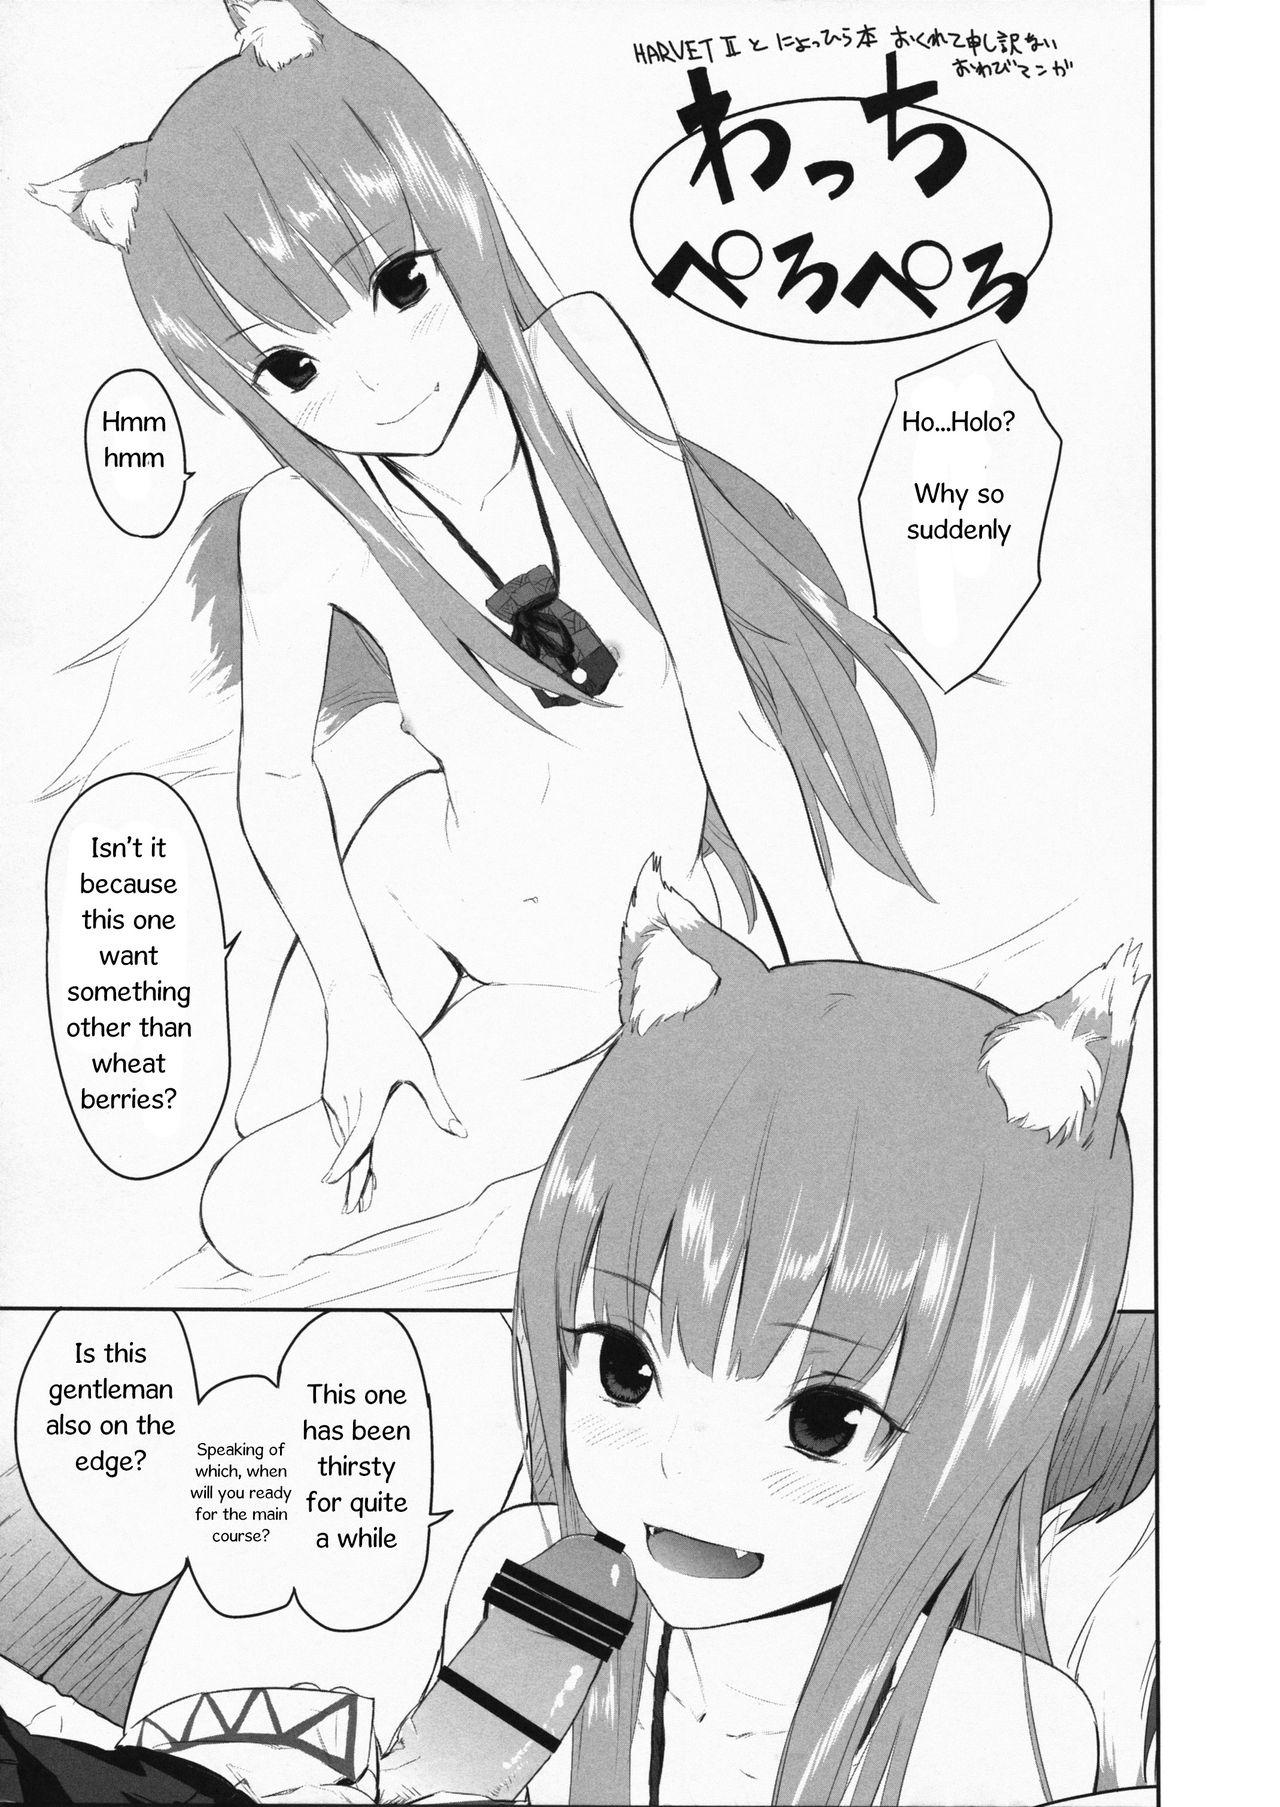 Soles Ajisai Maiden vol.1 - Code geass Spice and wolf Un-go Cock - Page 11